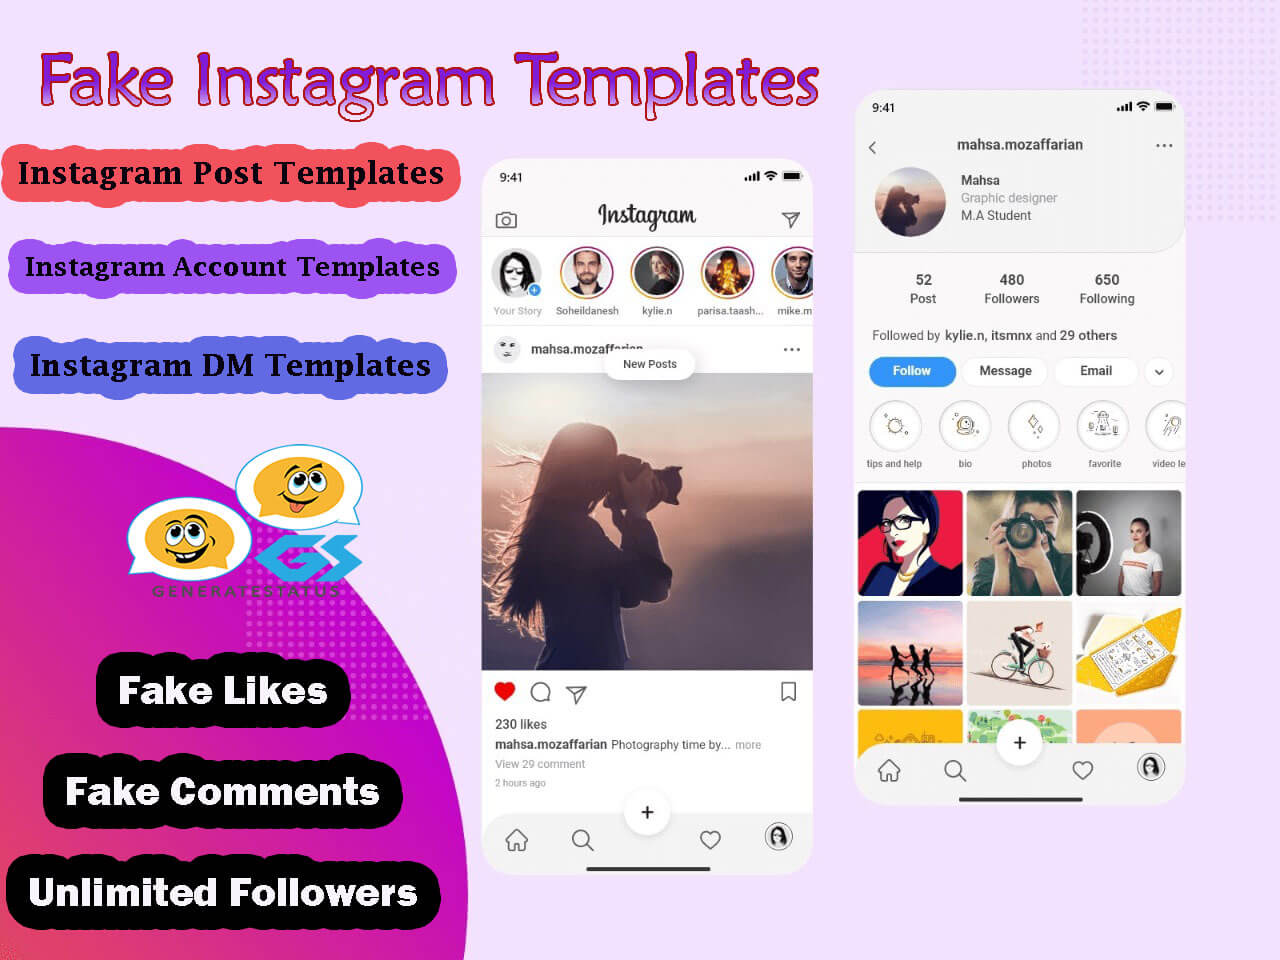 Instagram Templates Fake Instagram Post, Account and DM templates